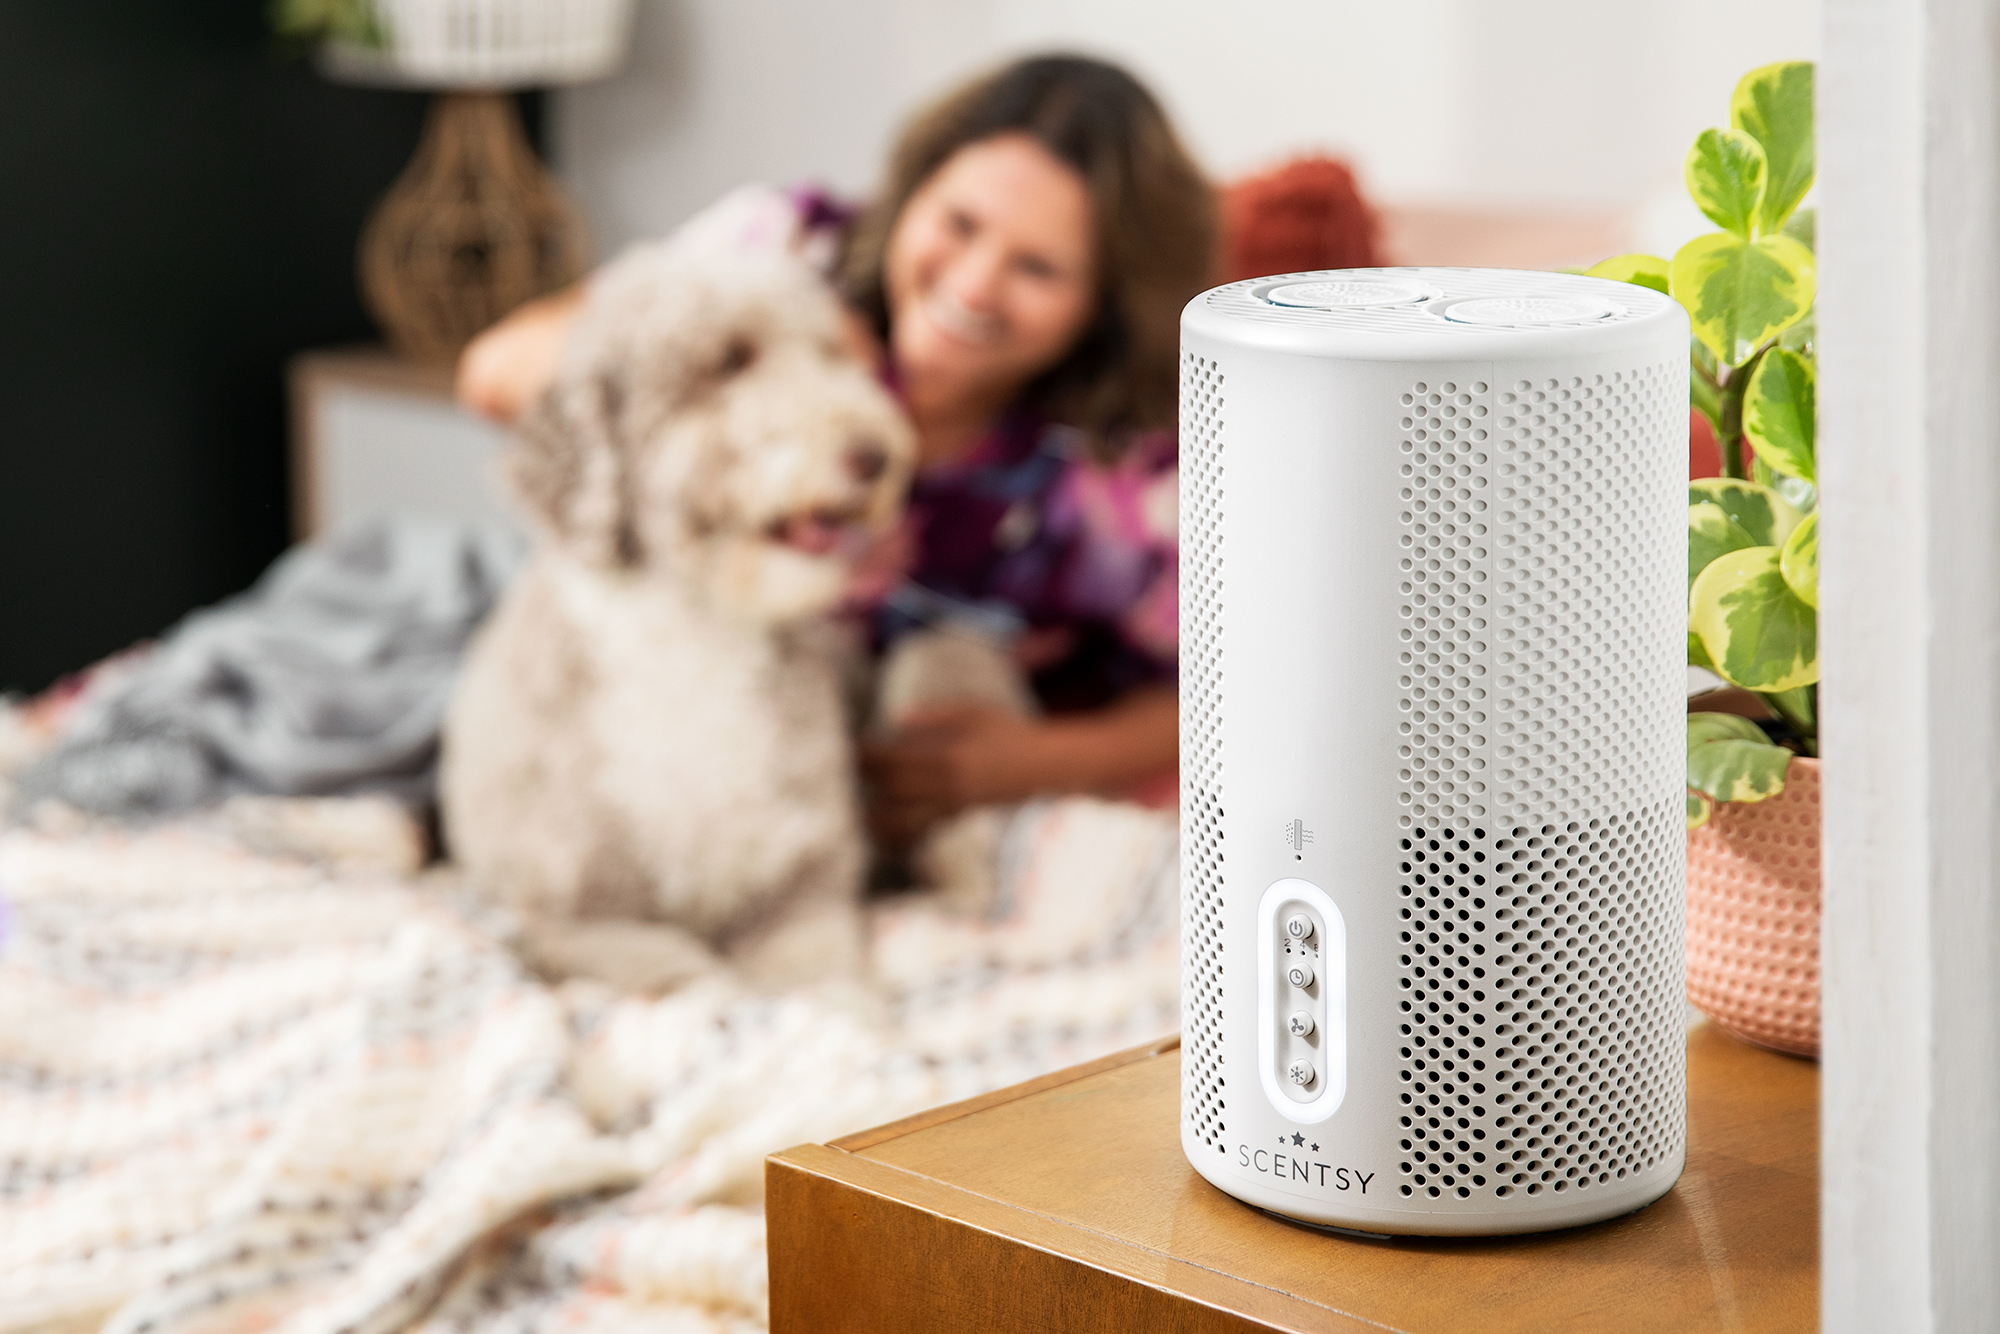 Scentsy's air purifier with a person and their dog in the background